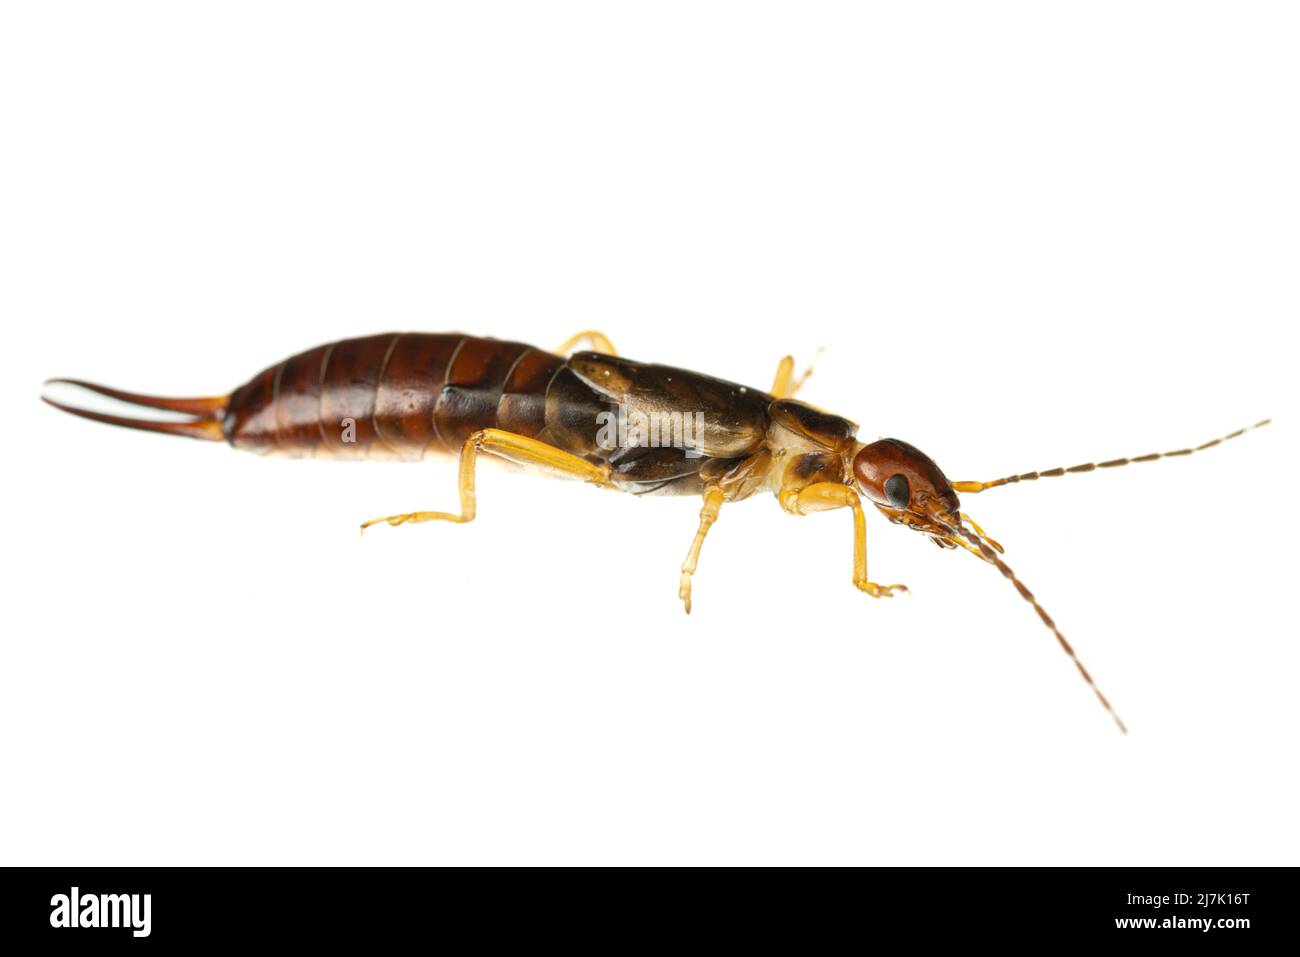 insects of europe: macro of common earwig ( Forficula auricularia german Gemeiner Ohrwurm ) isolated on white background - side view Stock Photo